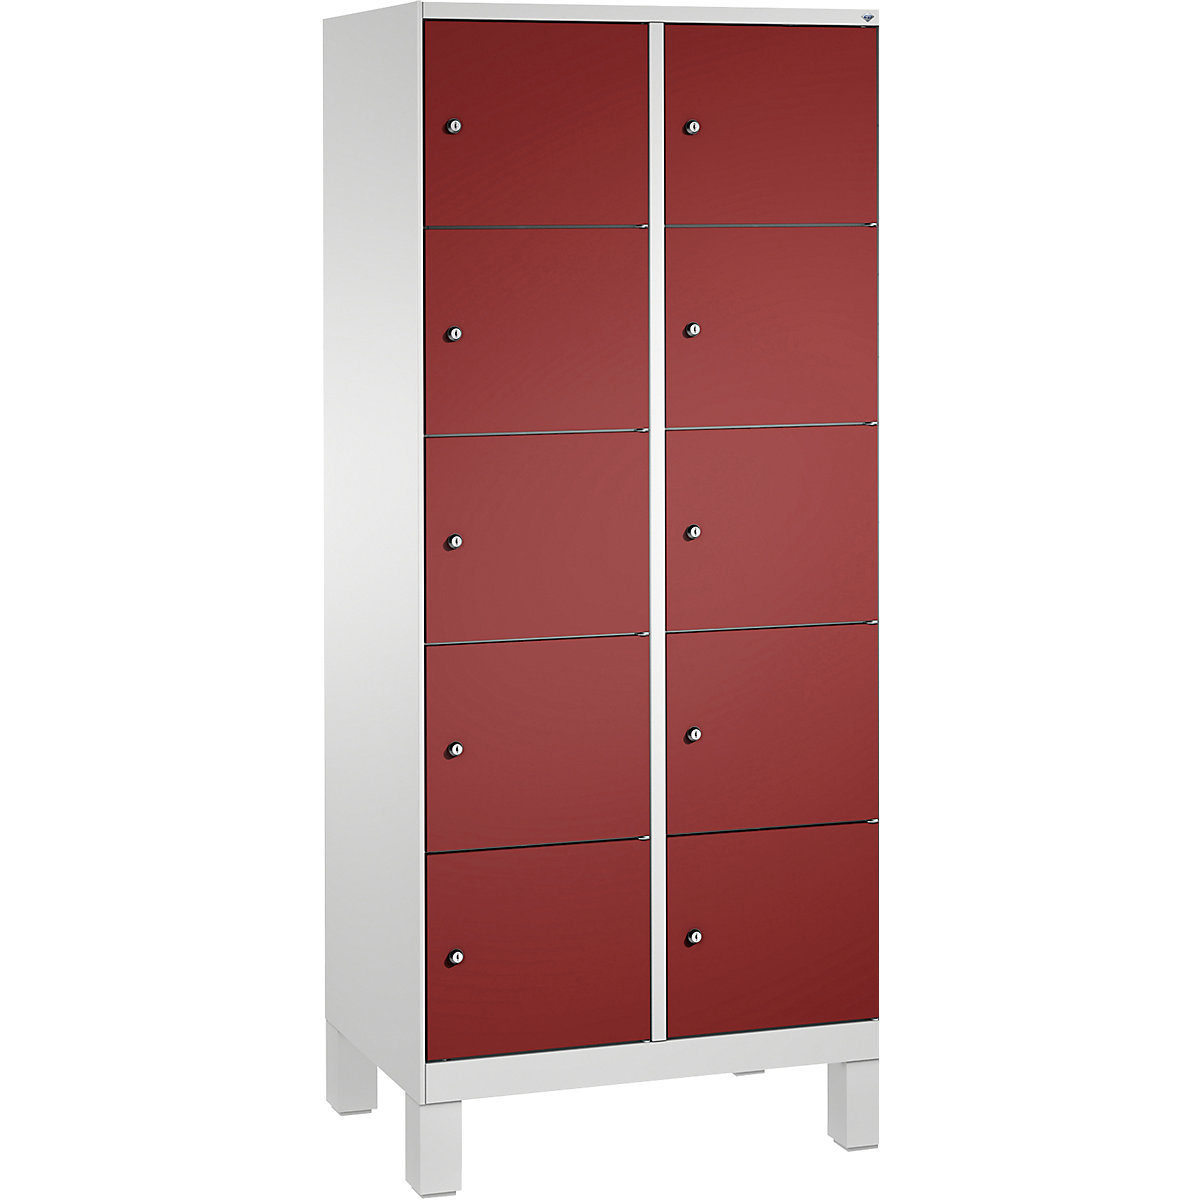 EVOLO locker unit, with feet – C+P, 2 compartments, 5 shelf compartments each, compartment width 400 mm, light grey / ruby red-9